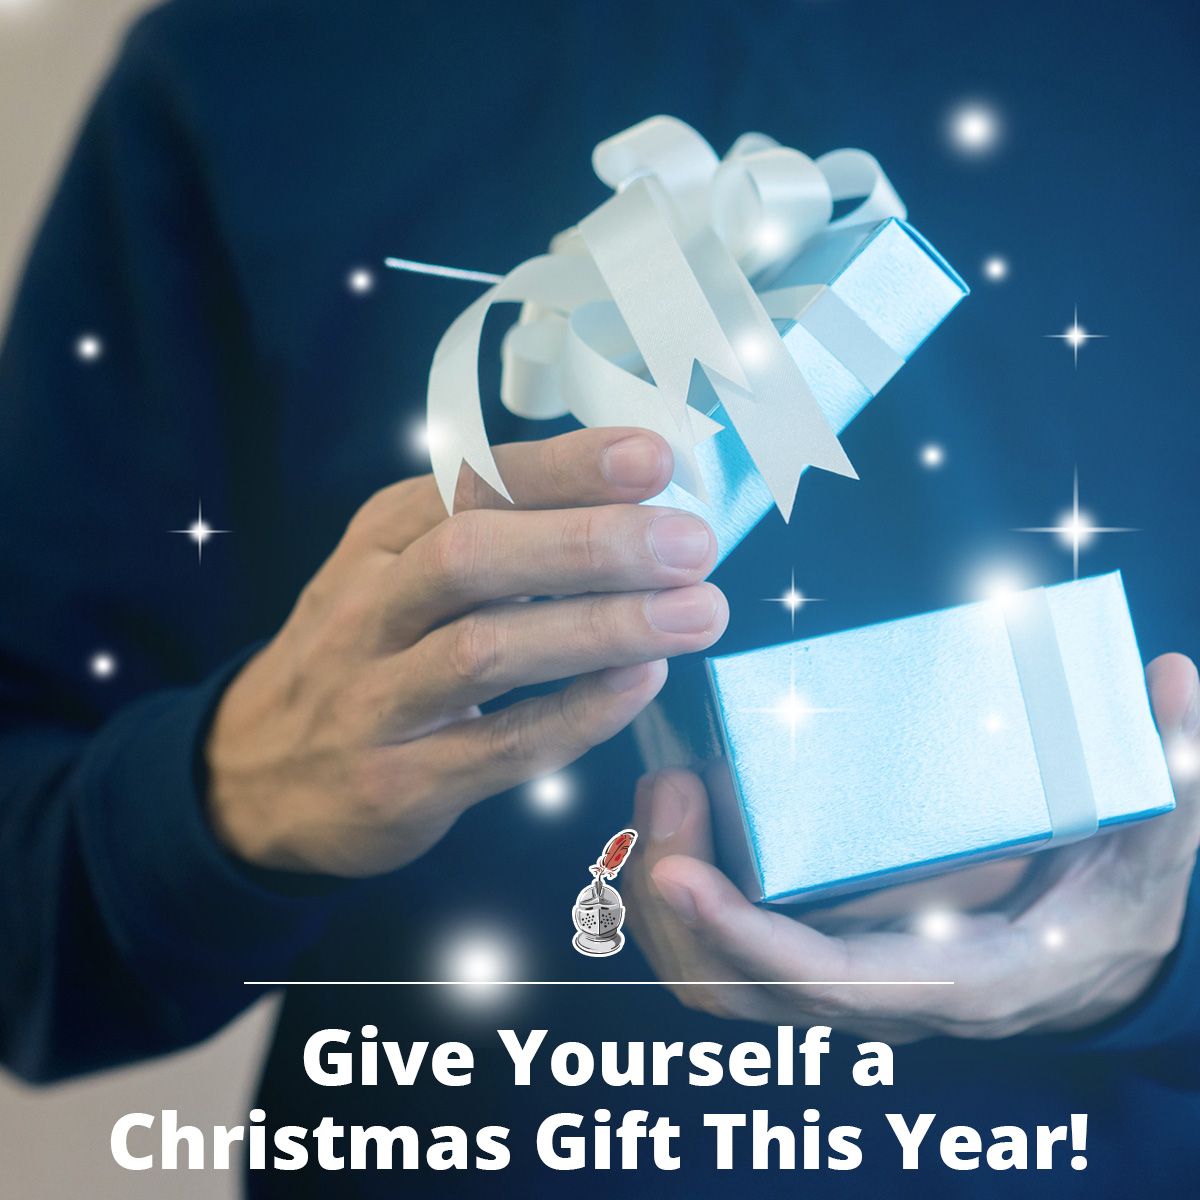 Give Yourself a Christmas Gift This Year!